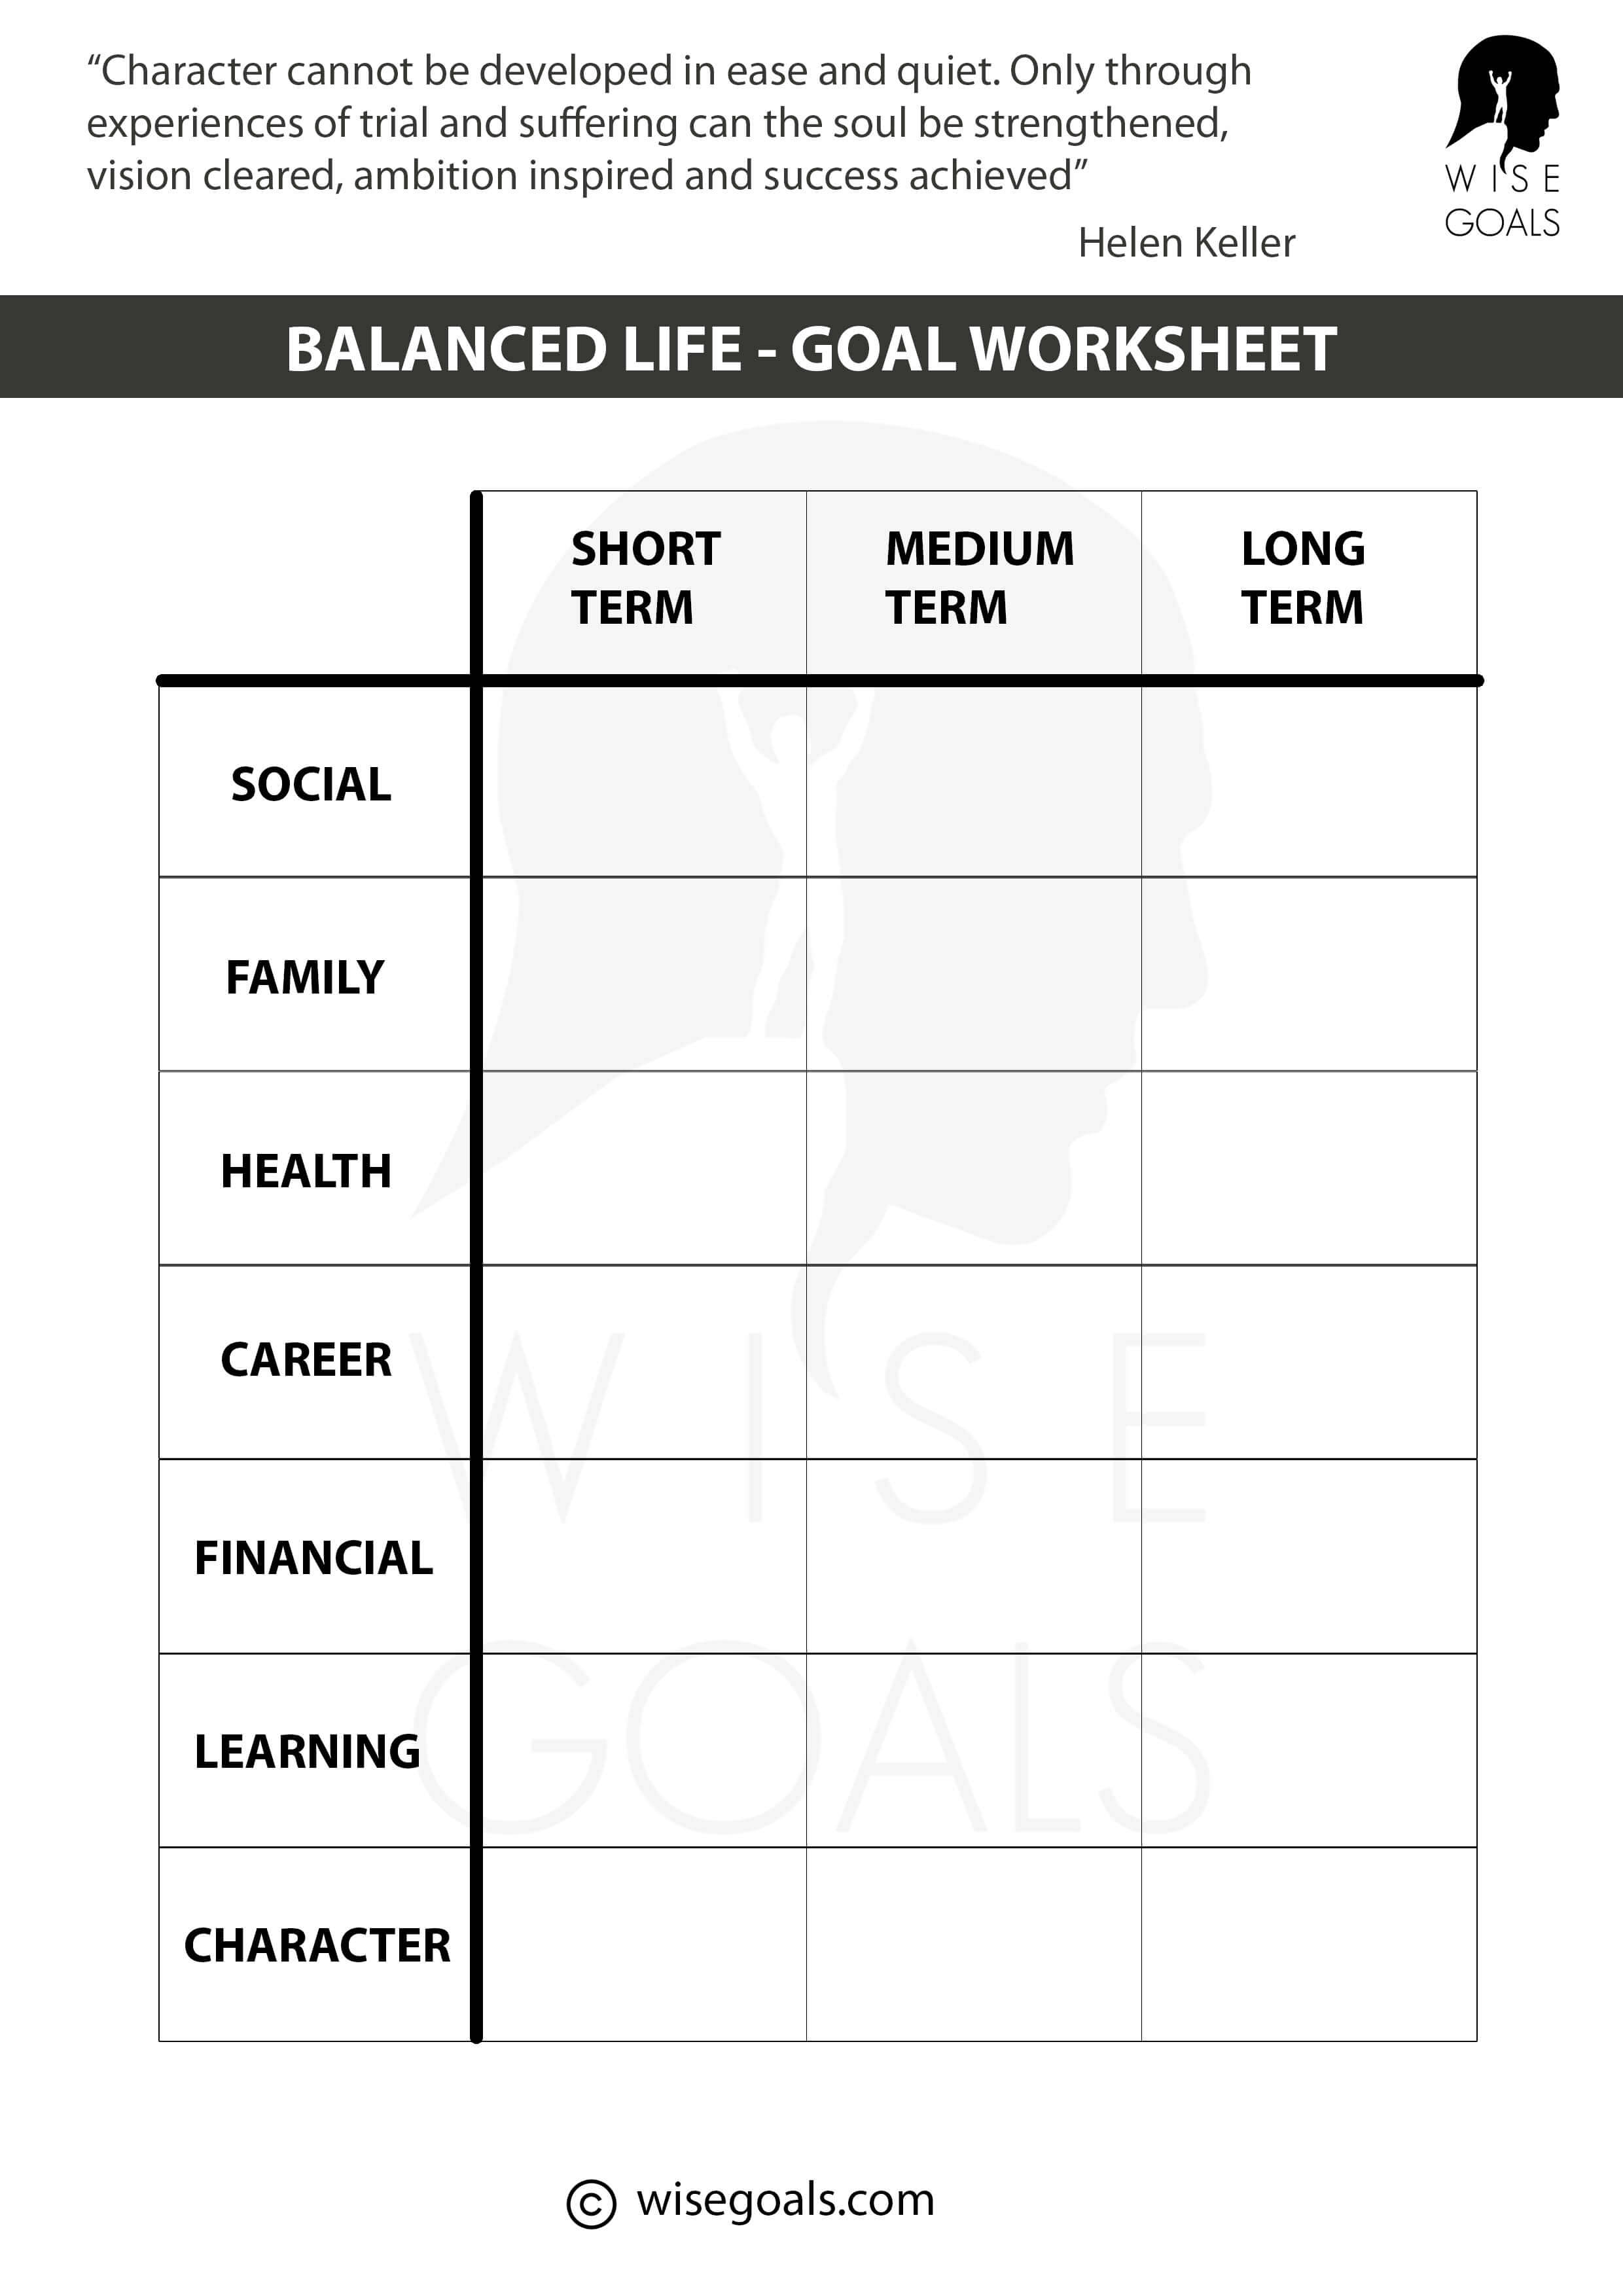 Goals in each area of life worksheet